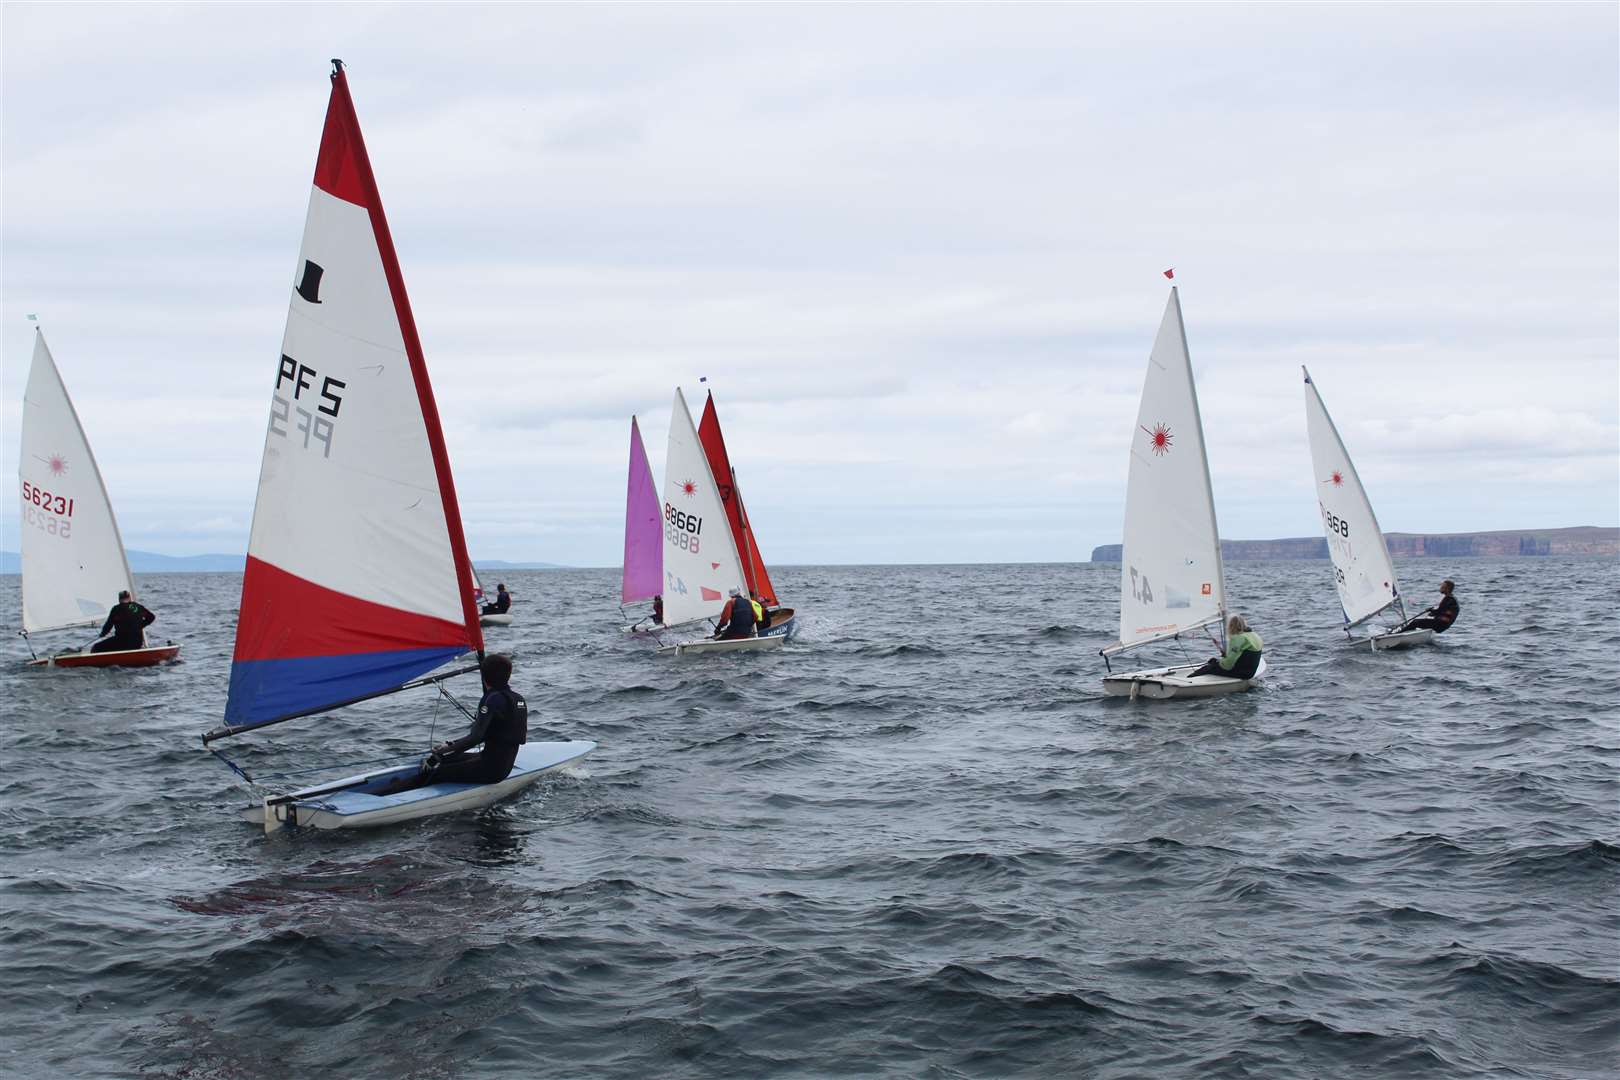 The boats immediately after the start of one of the races, jostling for position.